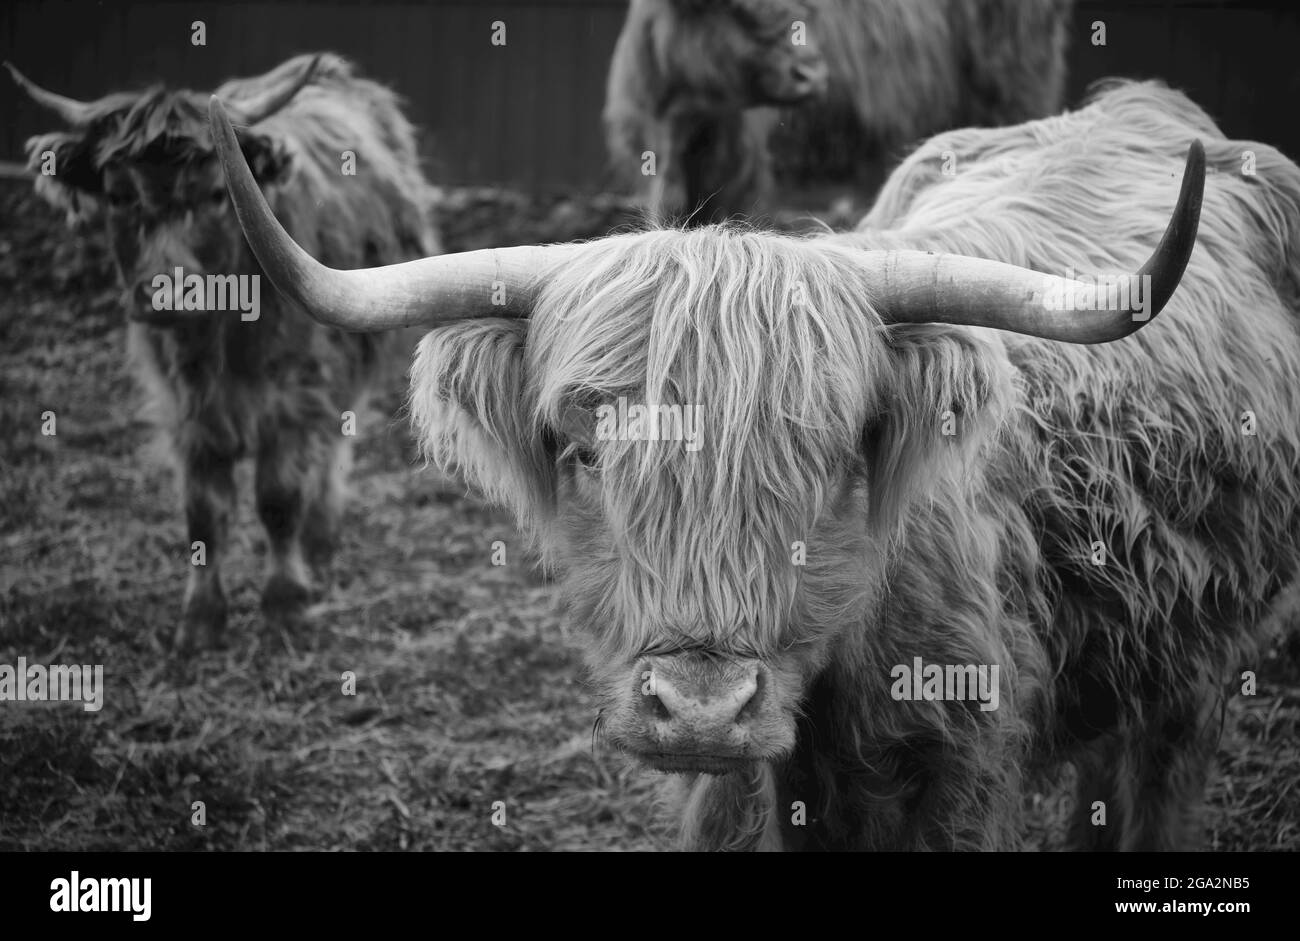 Close-up of Highland Cattle (Bos taurus) standing in a farmyard looking at camera; Lititz, Pennsylvania, United States of America Stock Photo